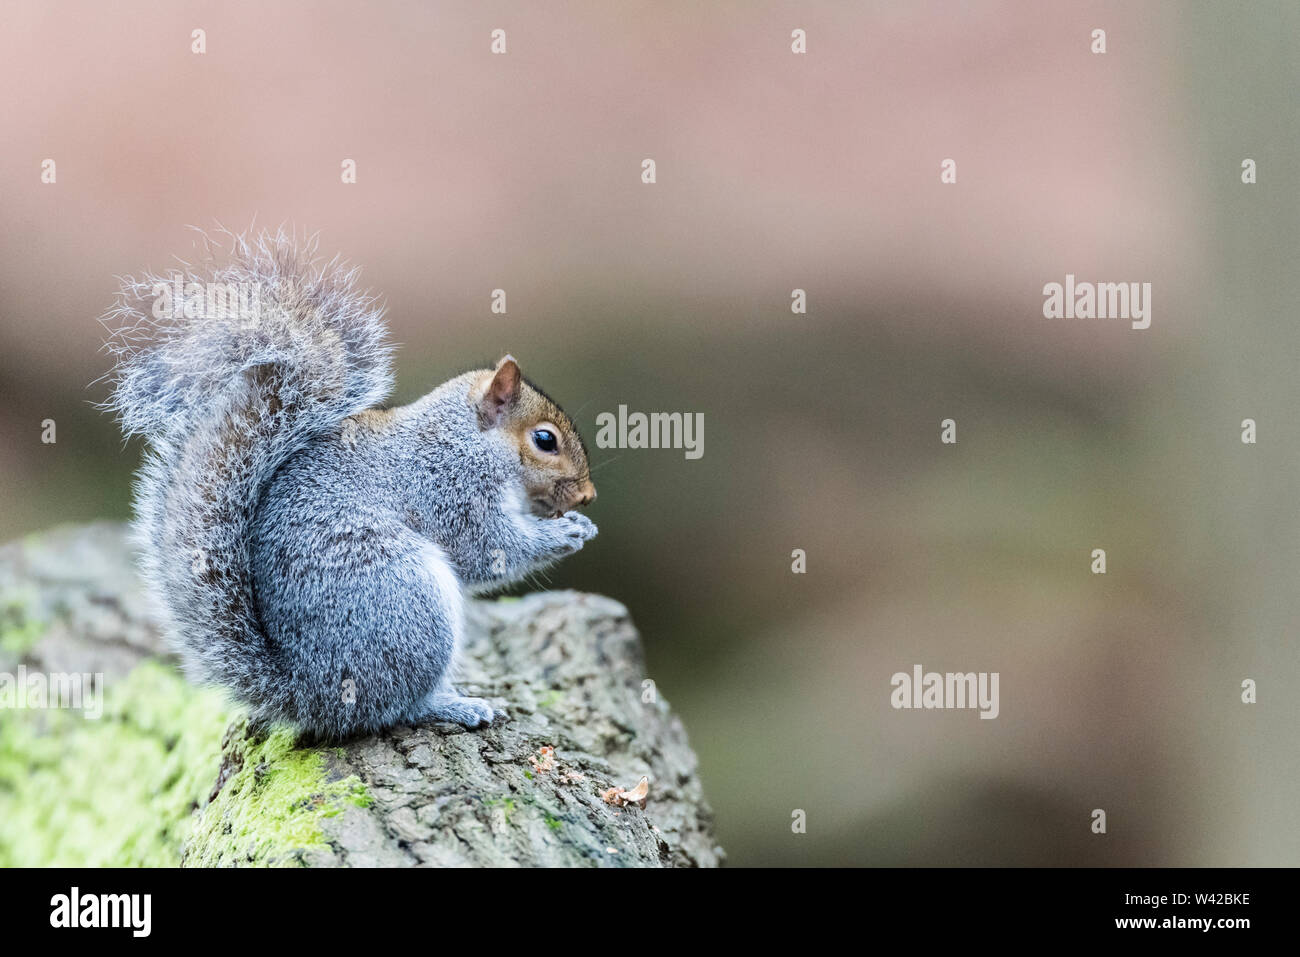 Grey squirrel on a mossy log holding a nut in its paws Stock Photo